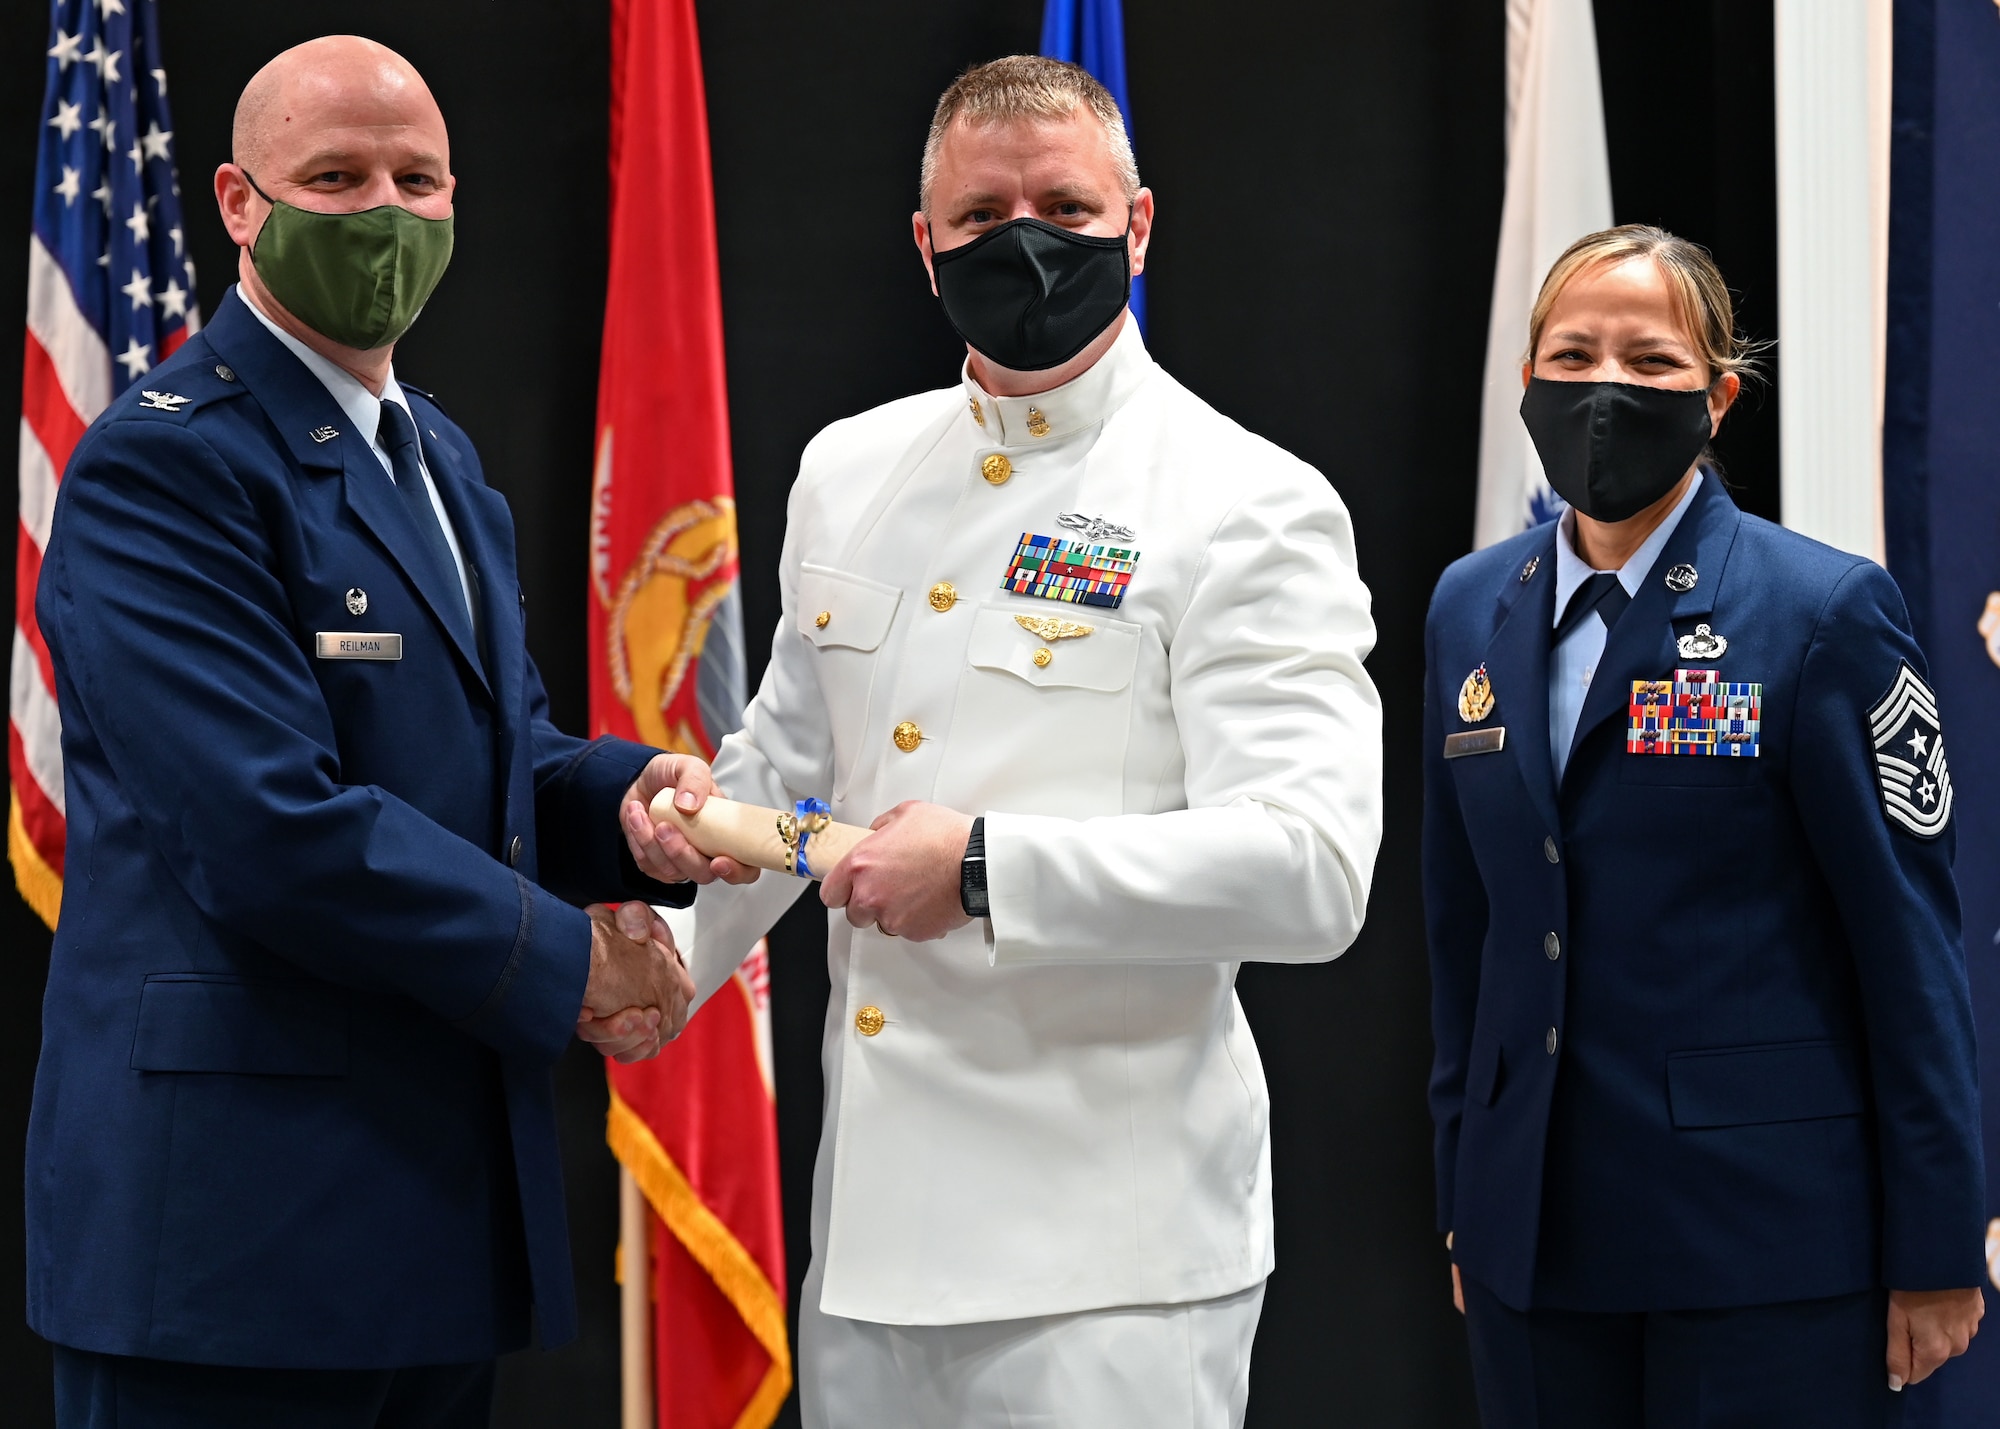 U.S. Air Force Col. Matthew Reilman, 17th Training Wing commander, presents U.S. Navy Senior Chief Petty Officer Jason Sikora, Naval Detachment Goodfellow, with a diploma from the Community College of the Air Force at the CCAF graduation in the Powell Event Center, Nov. 10, 2021. As an instructor, Sikora was eligible to earn his degree through the CCAF. (U.S. Air Force photo by Senior Airman Ethan Sherwood)